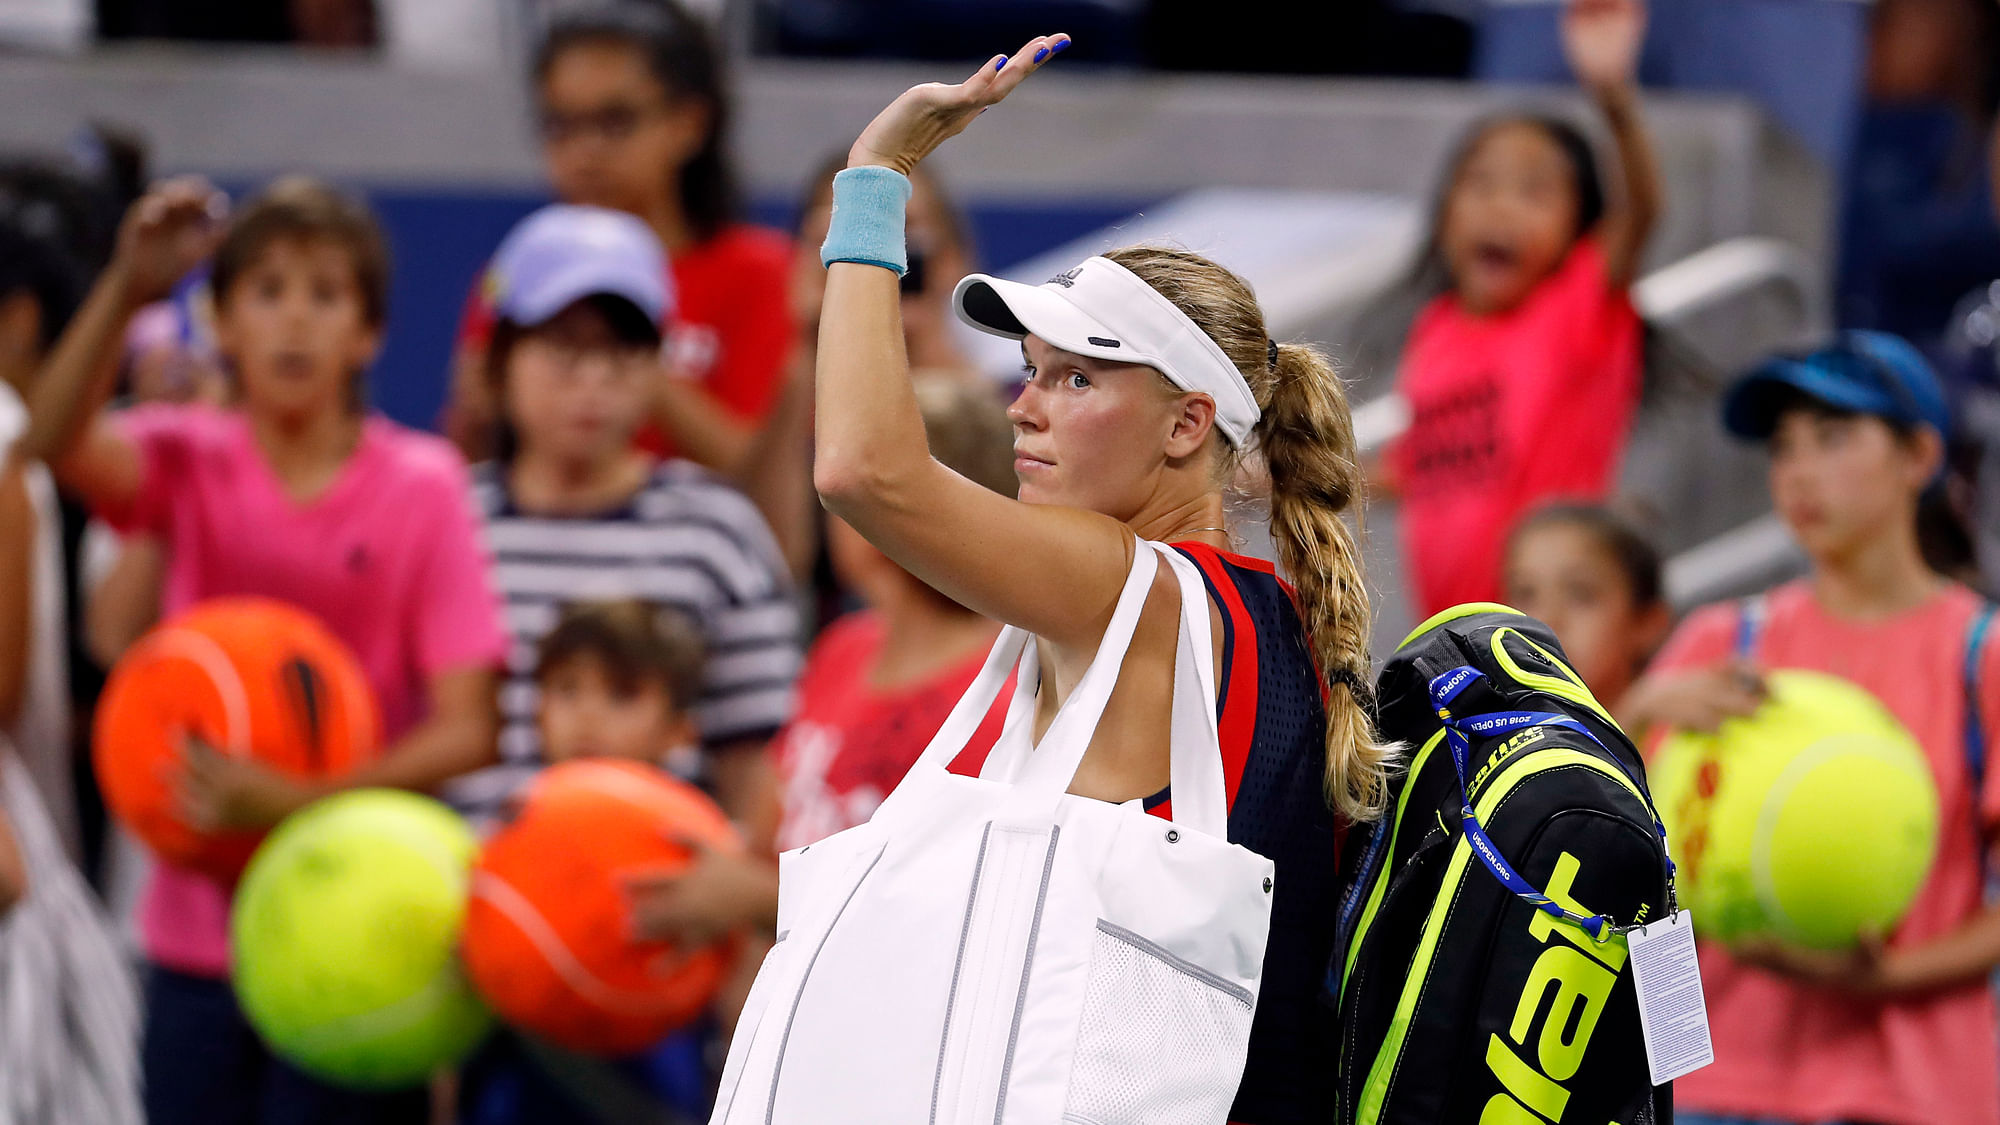 Caroline Wozniacki, of Denmark, waves as she leaves the court after losing to Lesla Tsurenko, of Ukraine, during the second round of the U.S. Open tennis tournament, Thursday